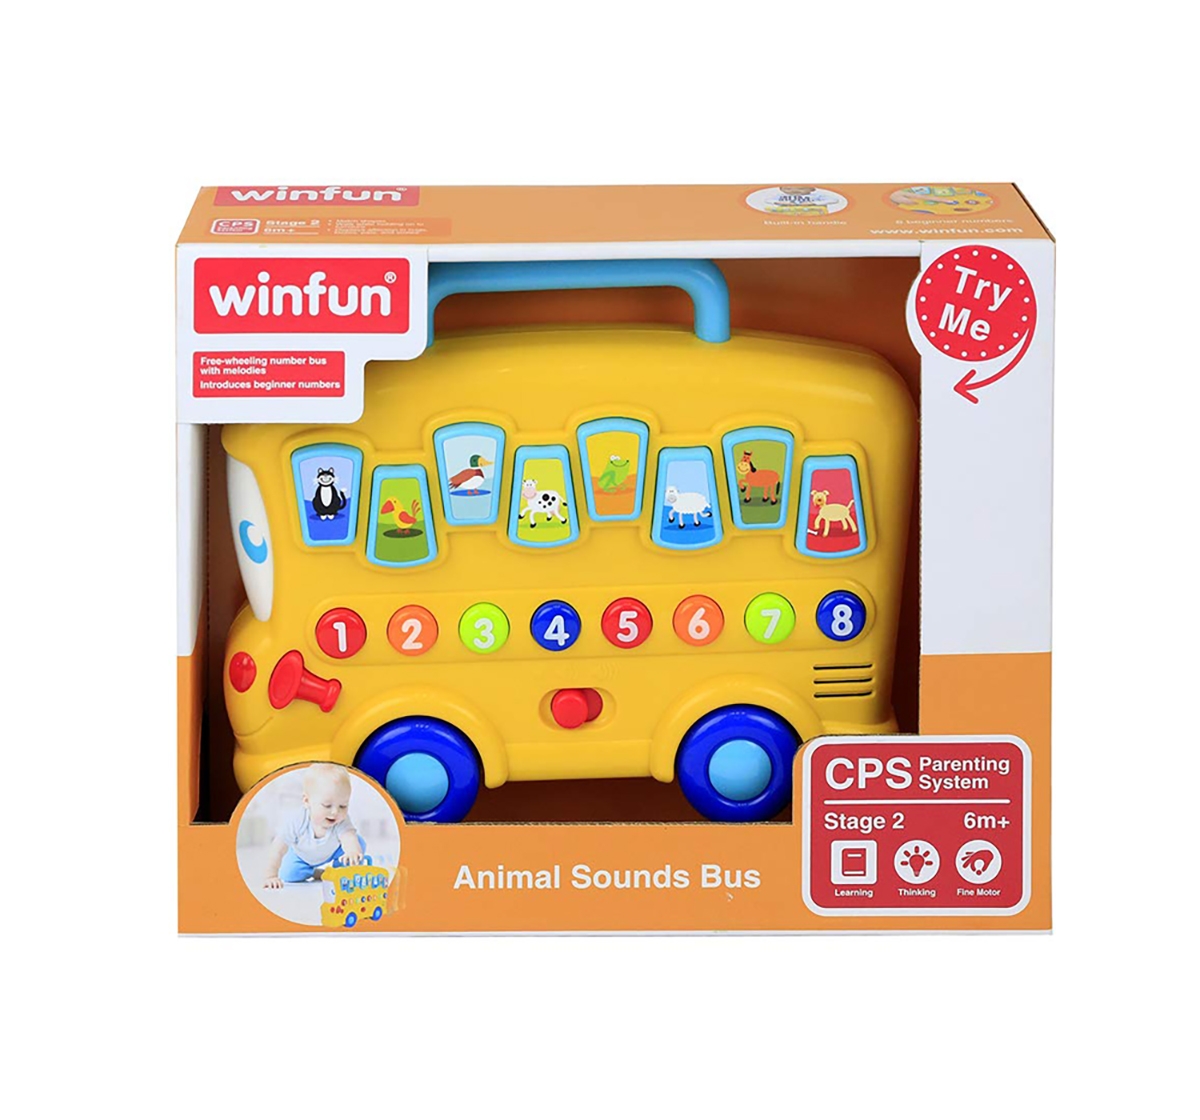 WinFun | Winfun - Animal Sounds Bus Learning Toys for Kids age 6M+ 0